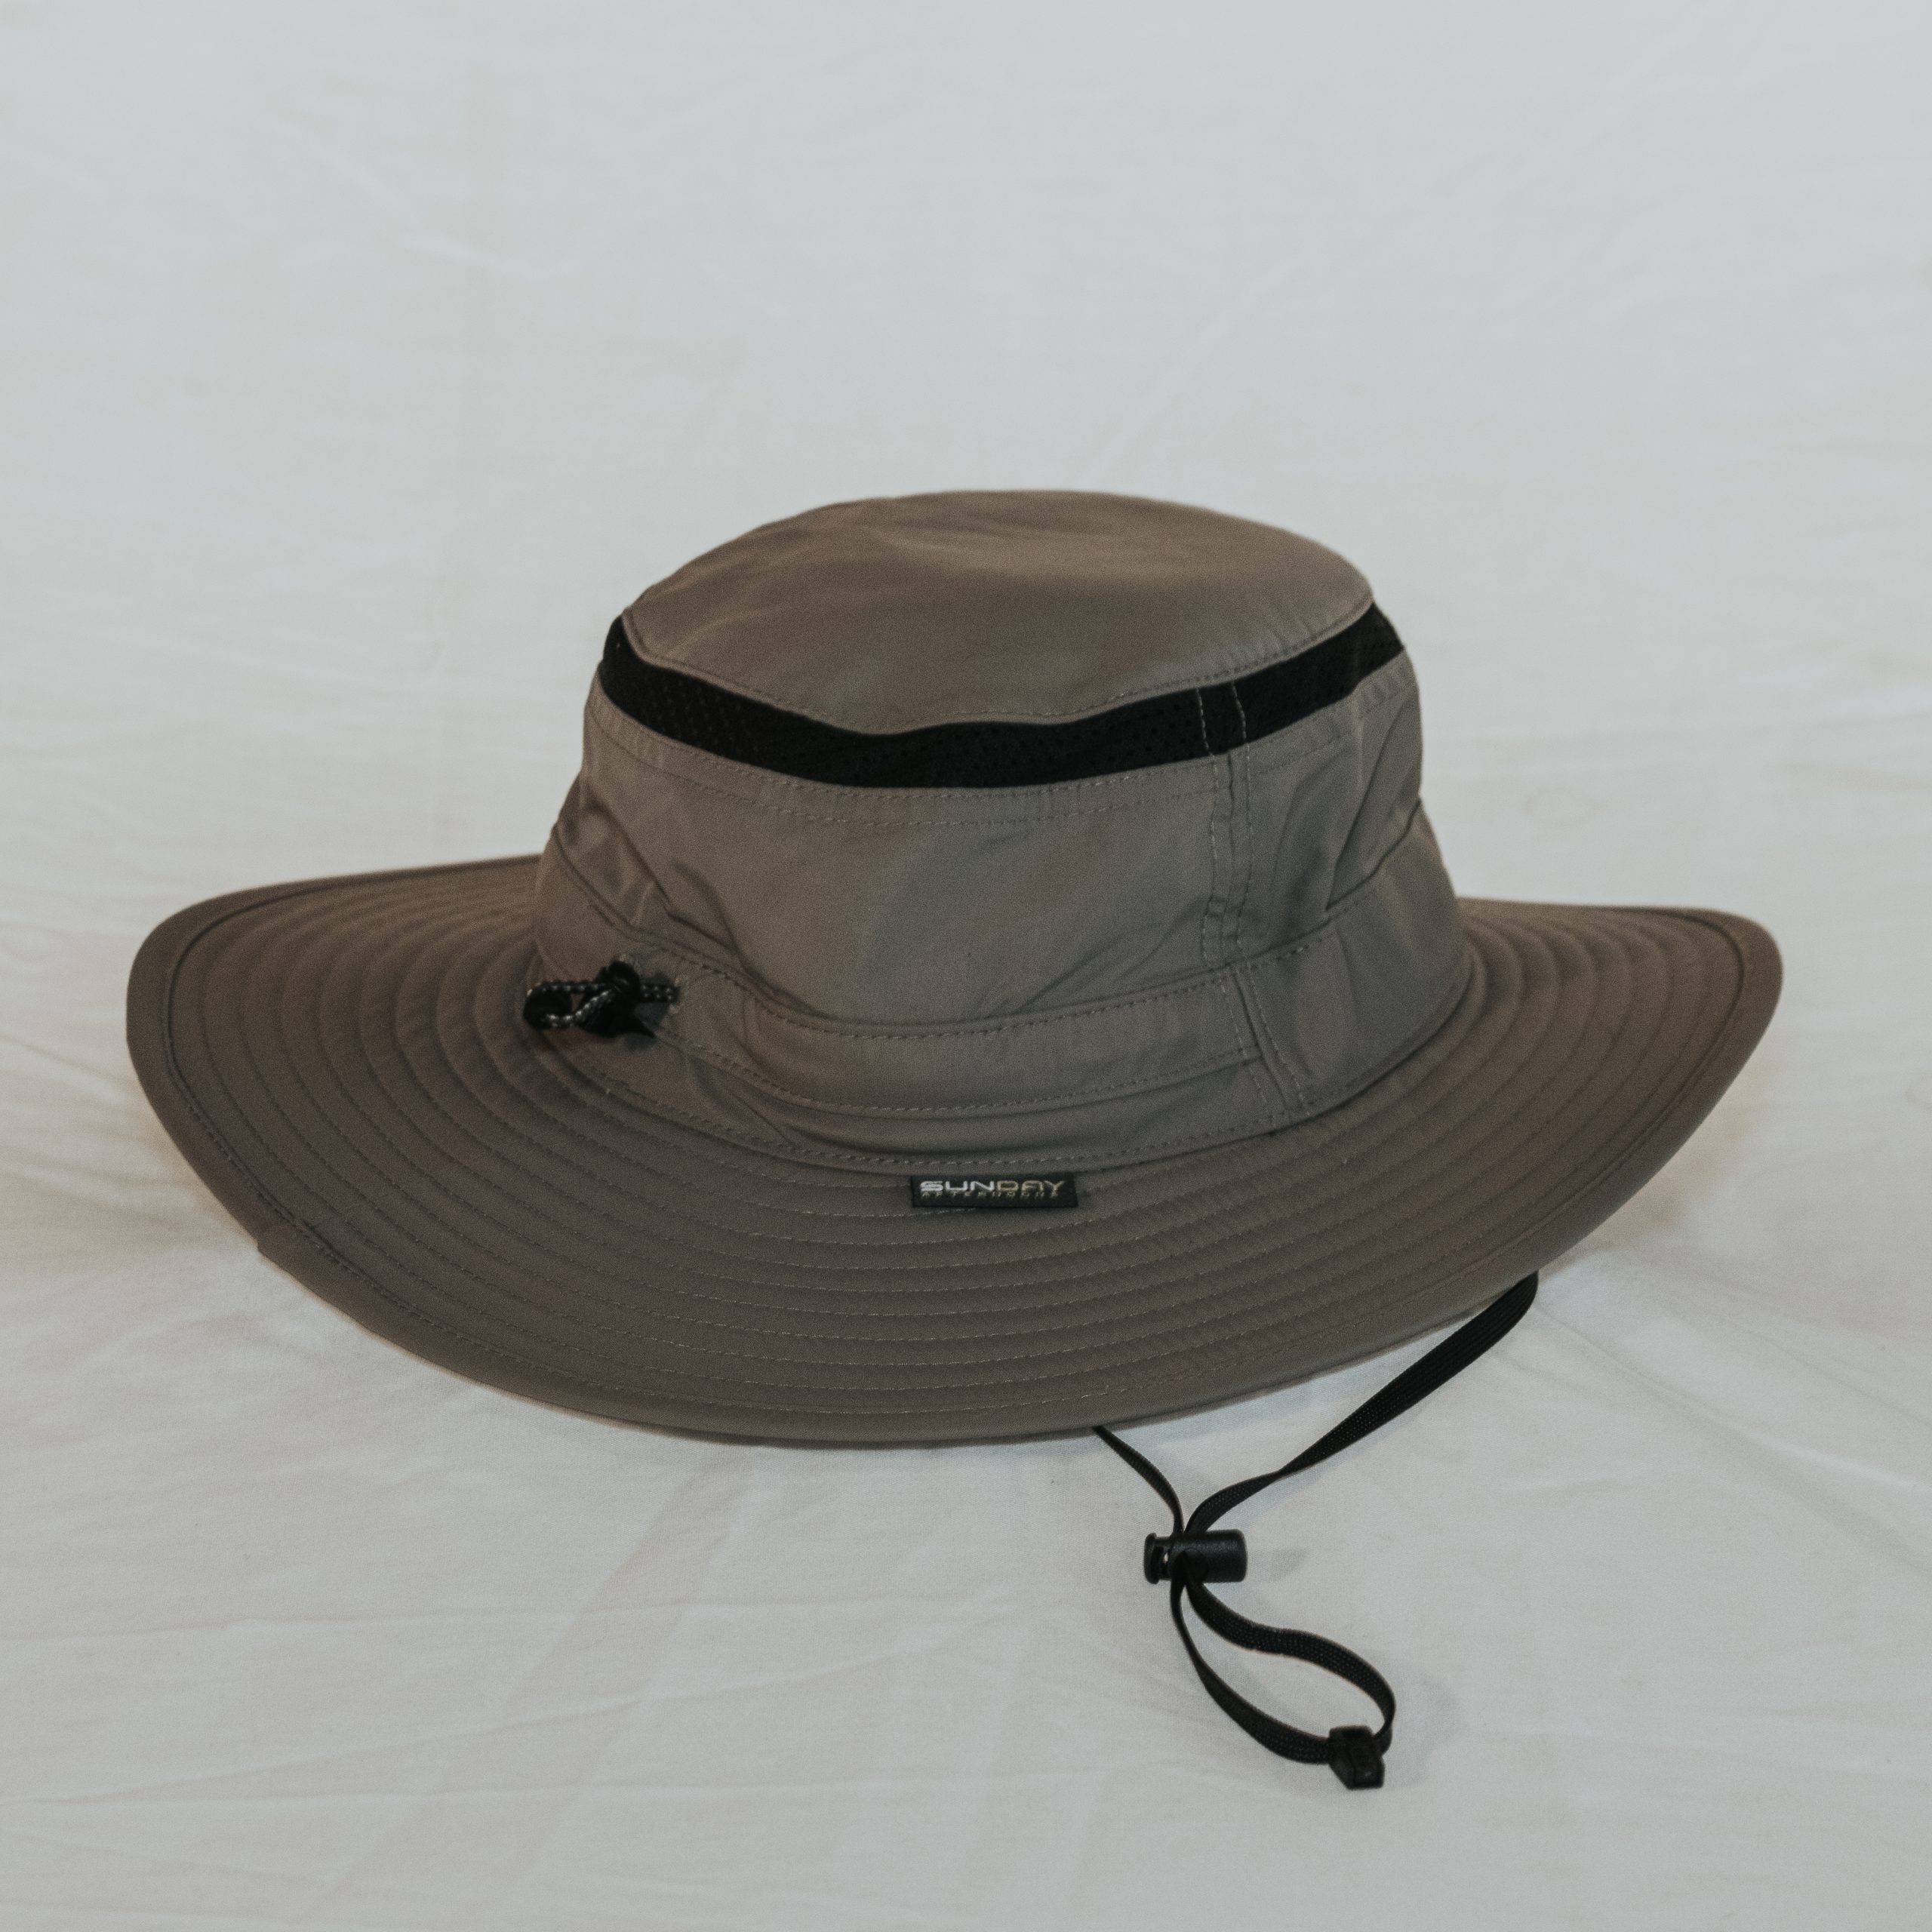 Kayakers Bucket Hat - The Boat Shed at Mossy Point